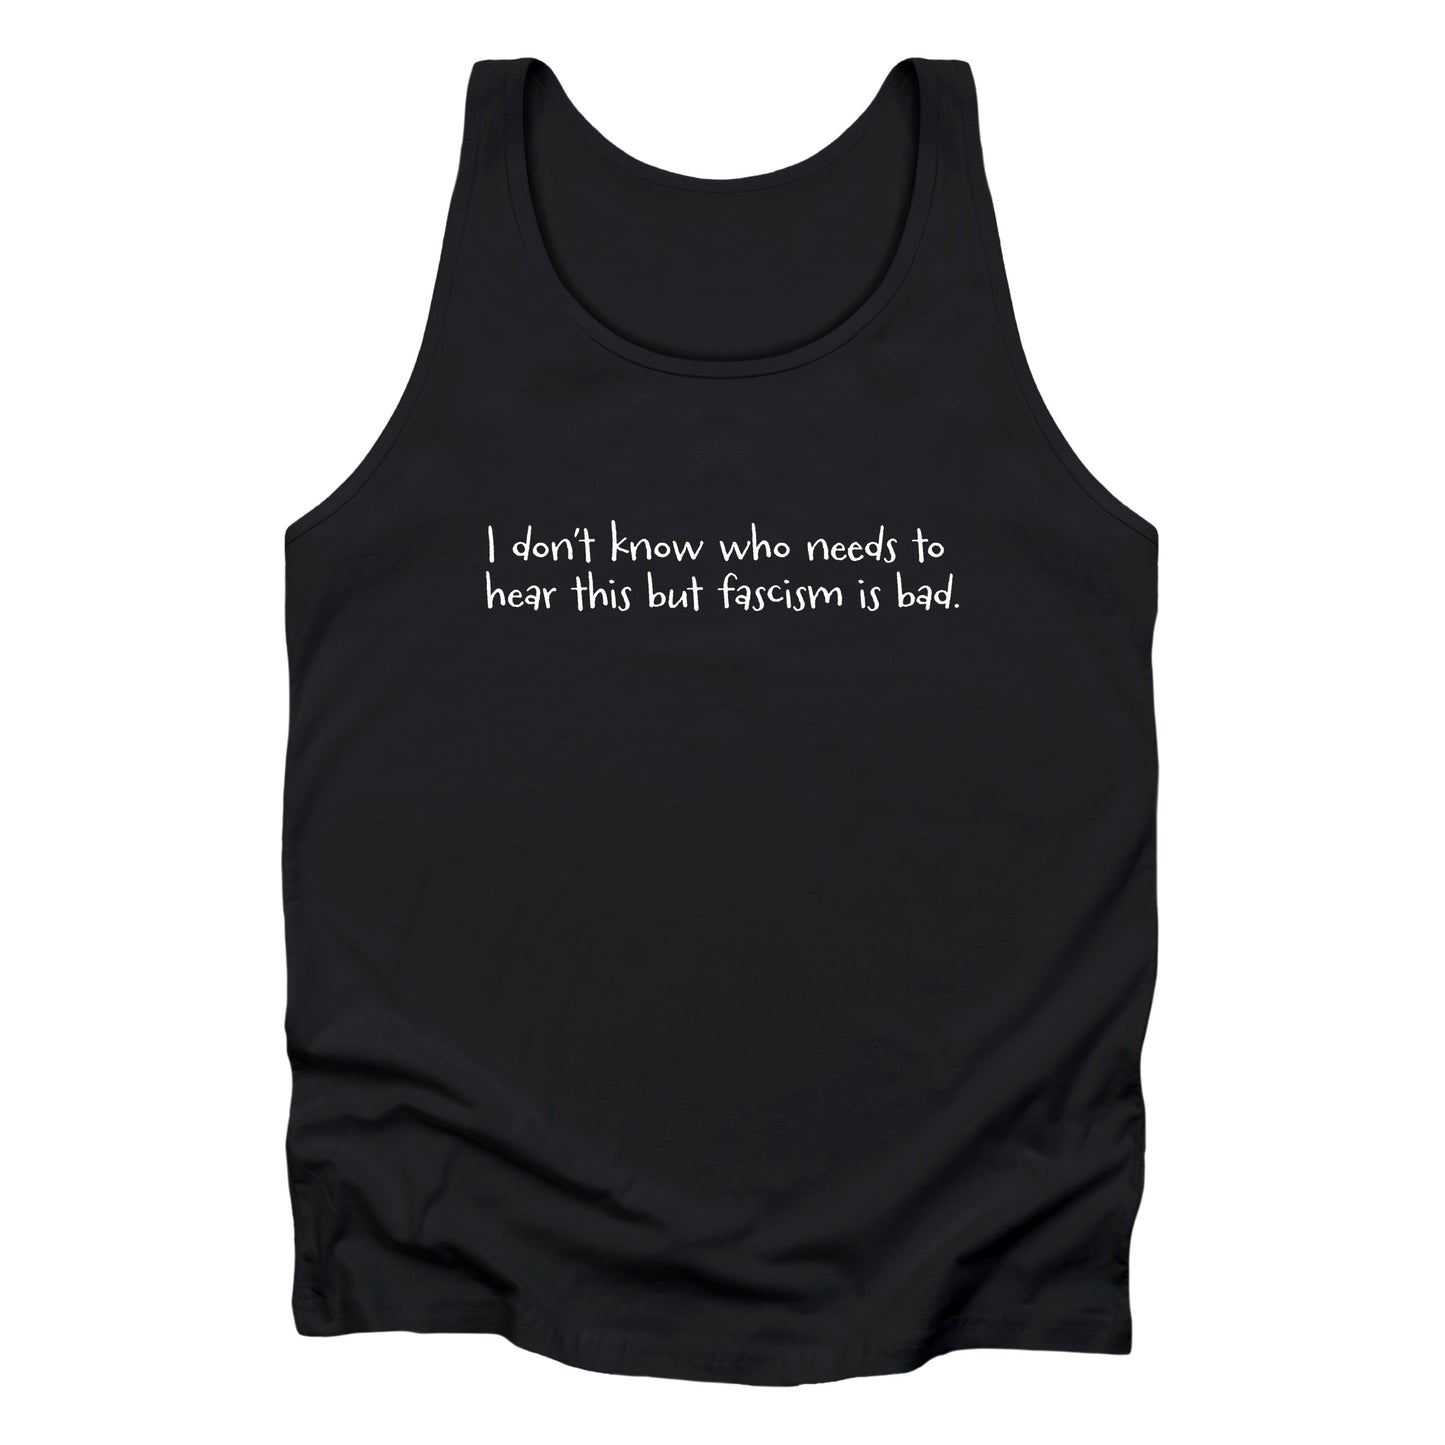 Black unisex tank top that reads in a hand-written font, “I don’t know who needs to hear this but fascism is bad.” It takes up two lines.